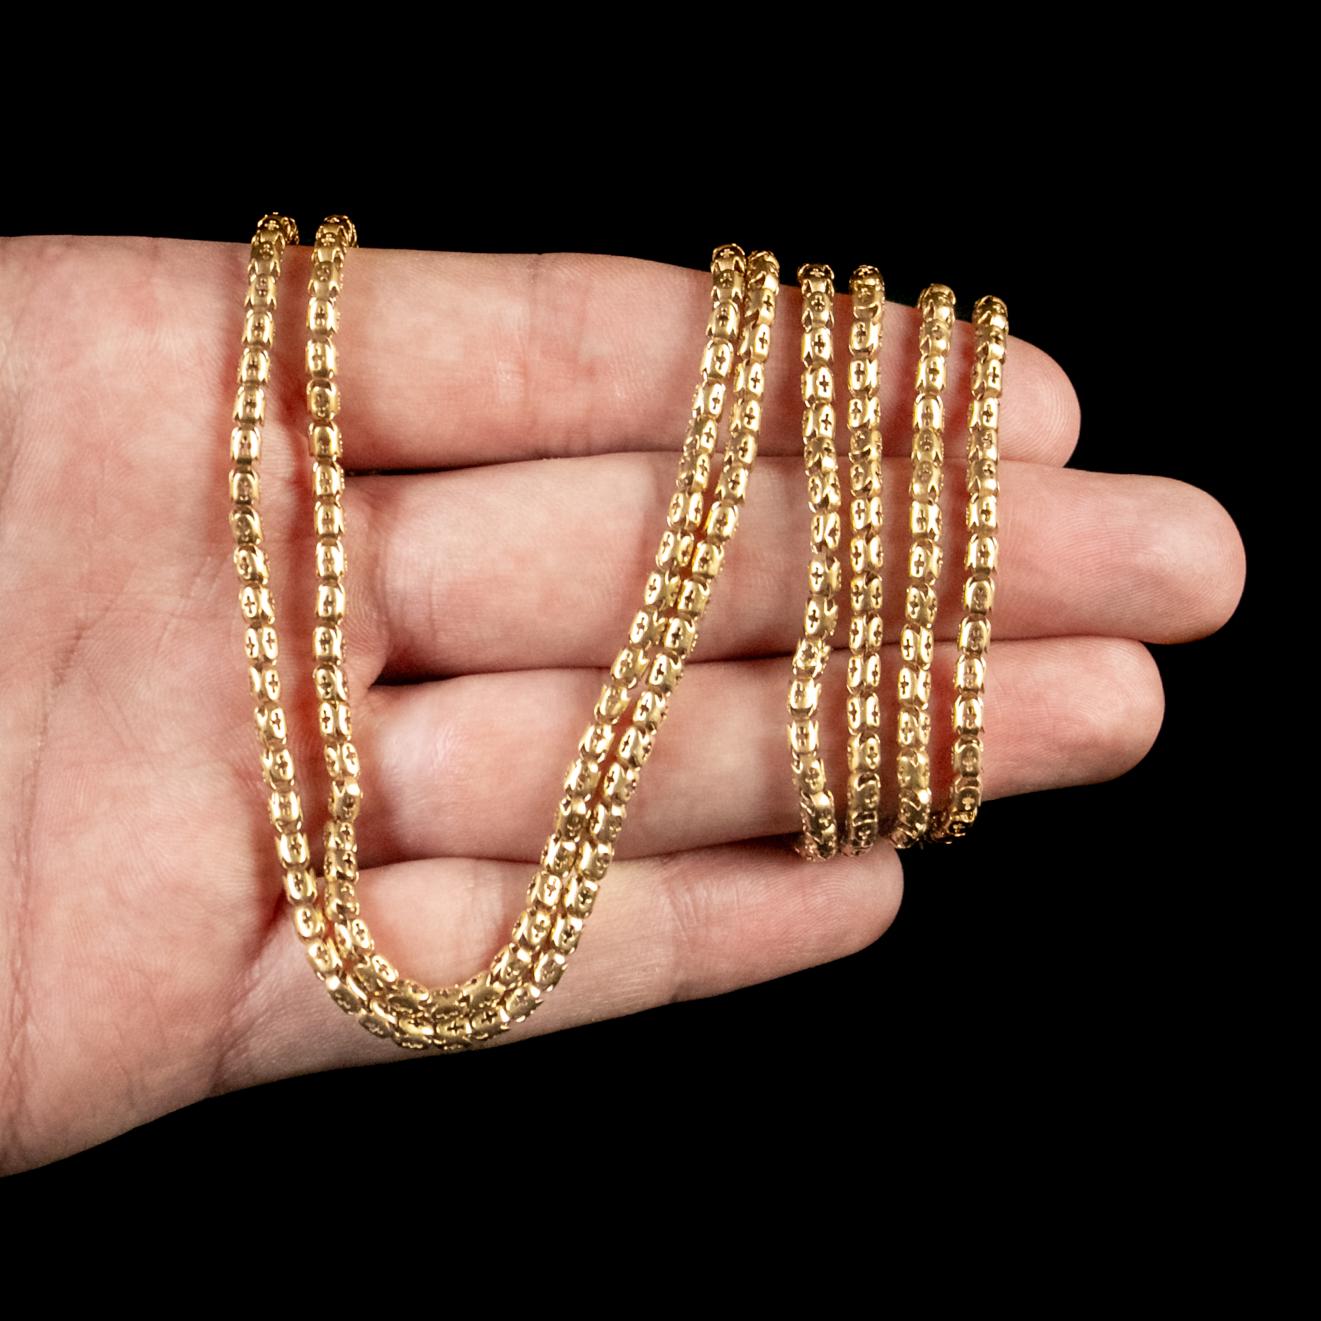 Women's Antique Victorian Guard Chain 18 Carat Gold on Silver Link Necklace, circa 1880 For Sale